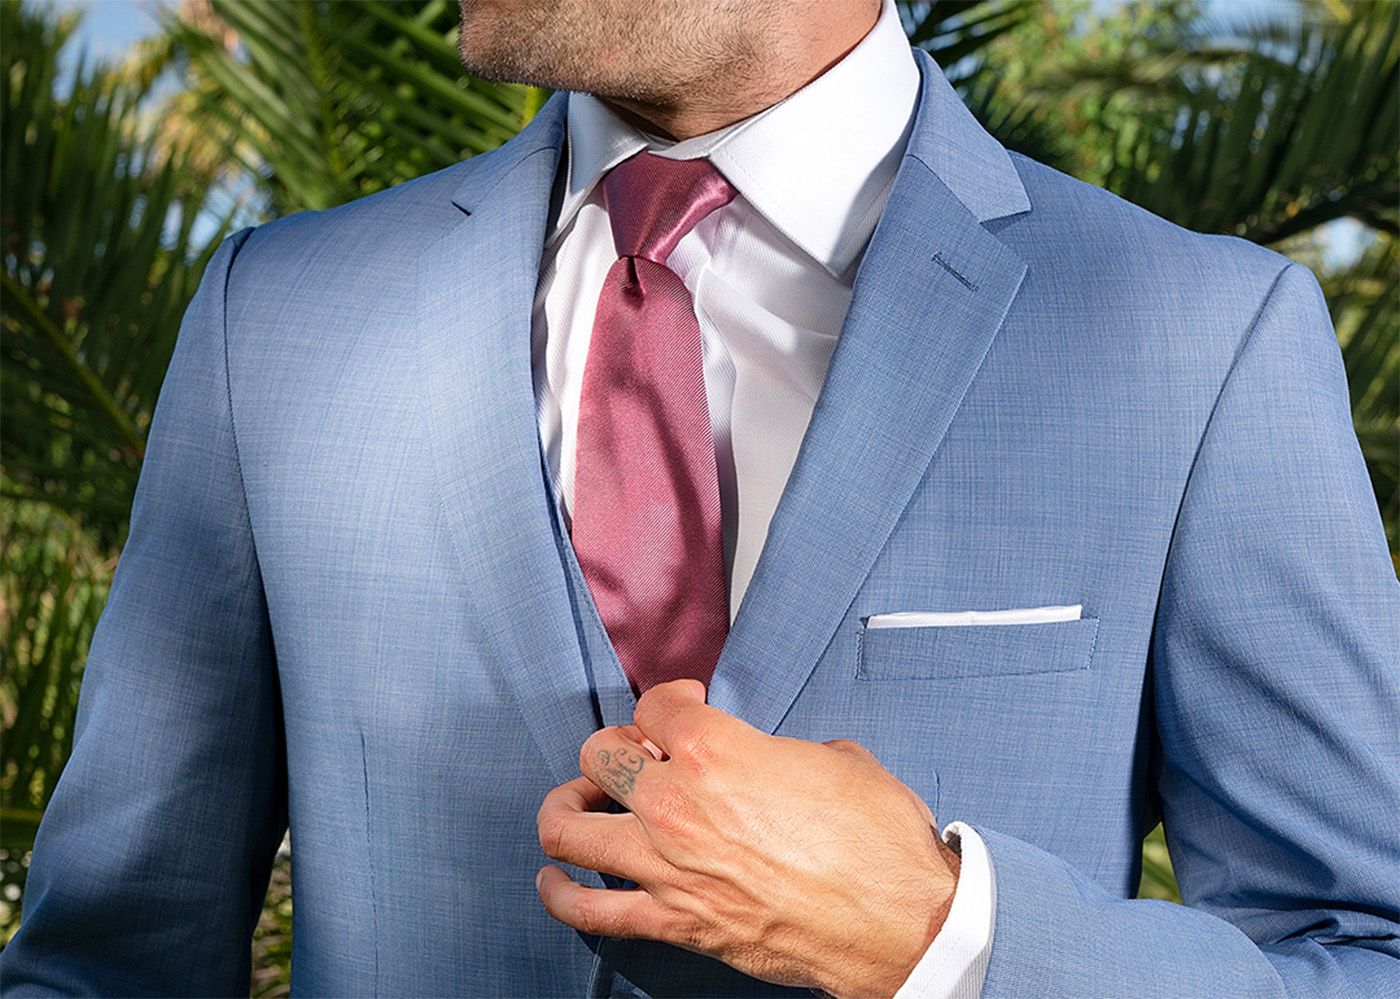 Suit and tuxedo rentals shipped throughout California